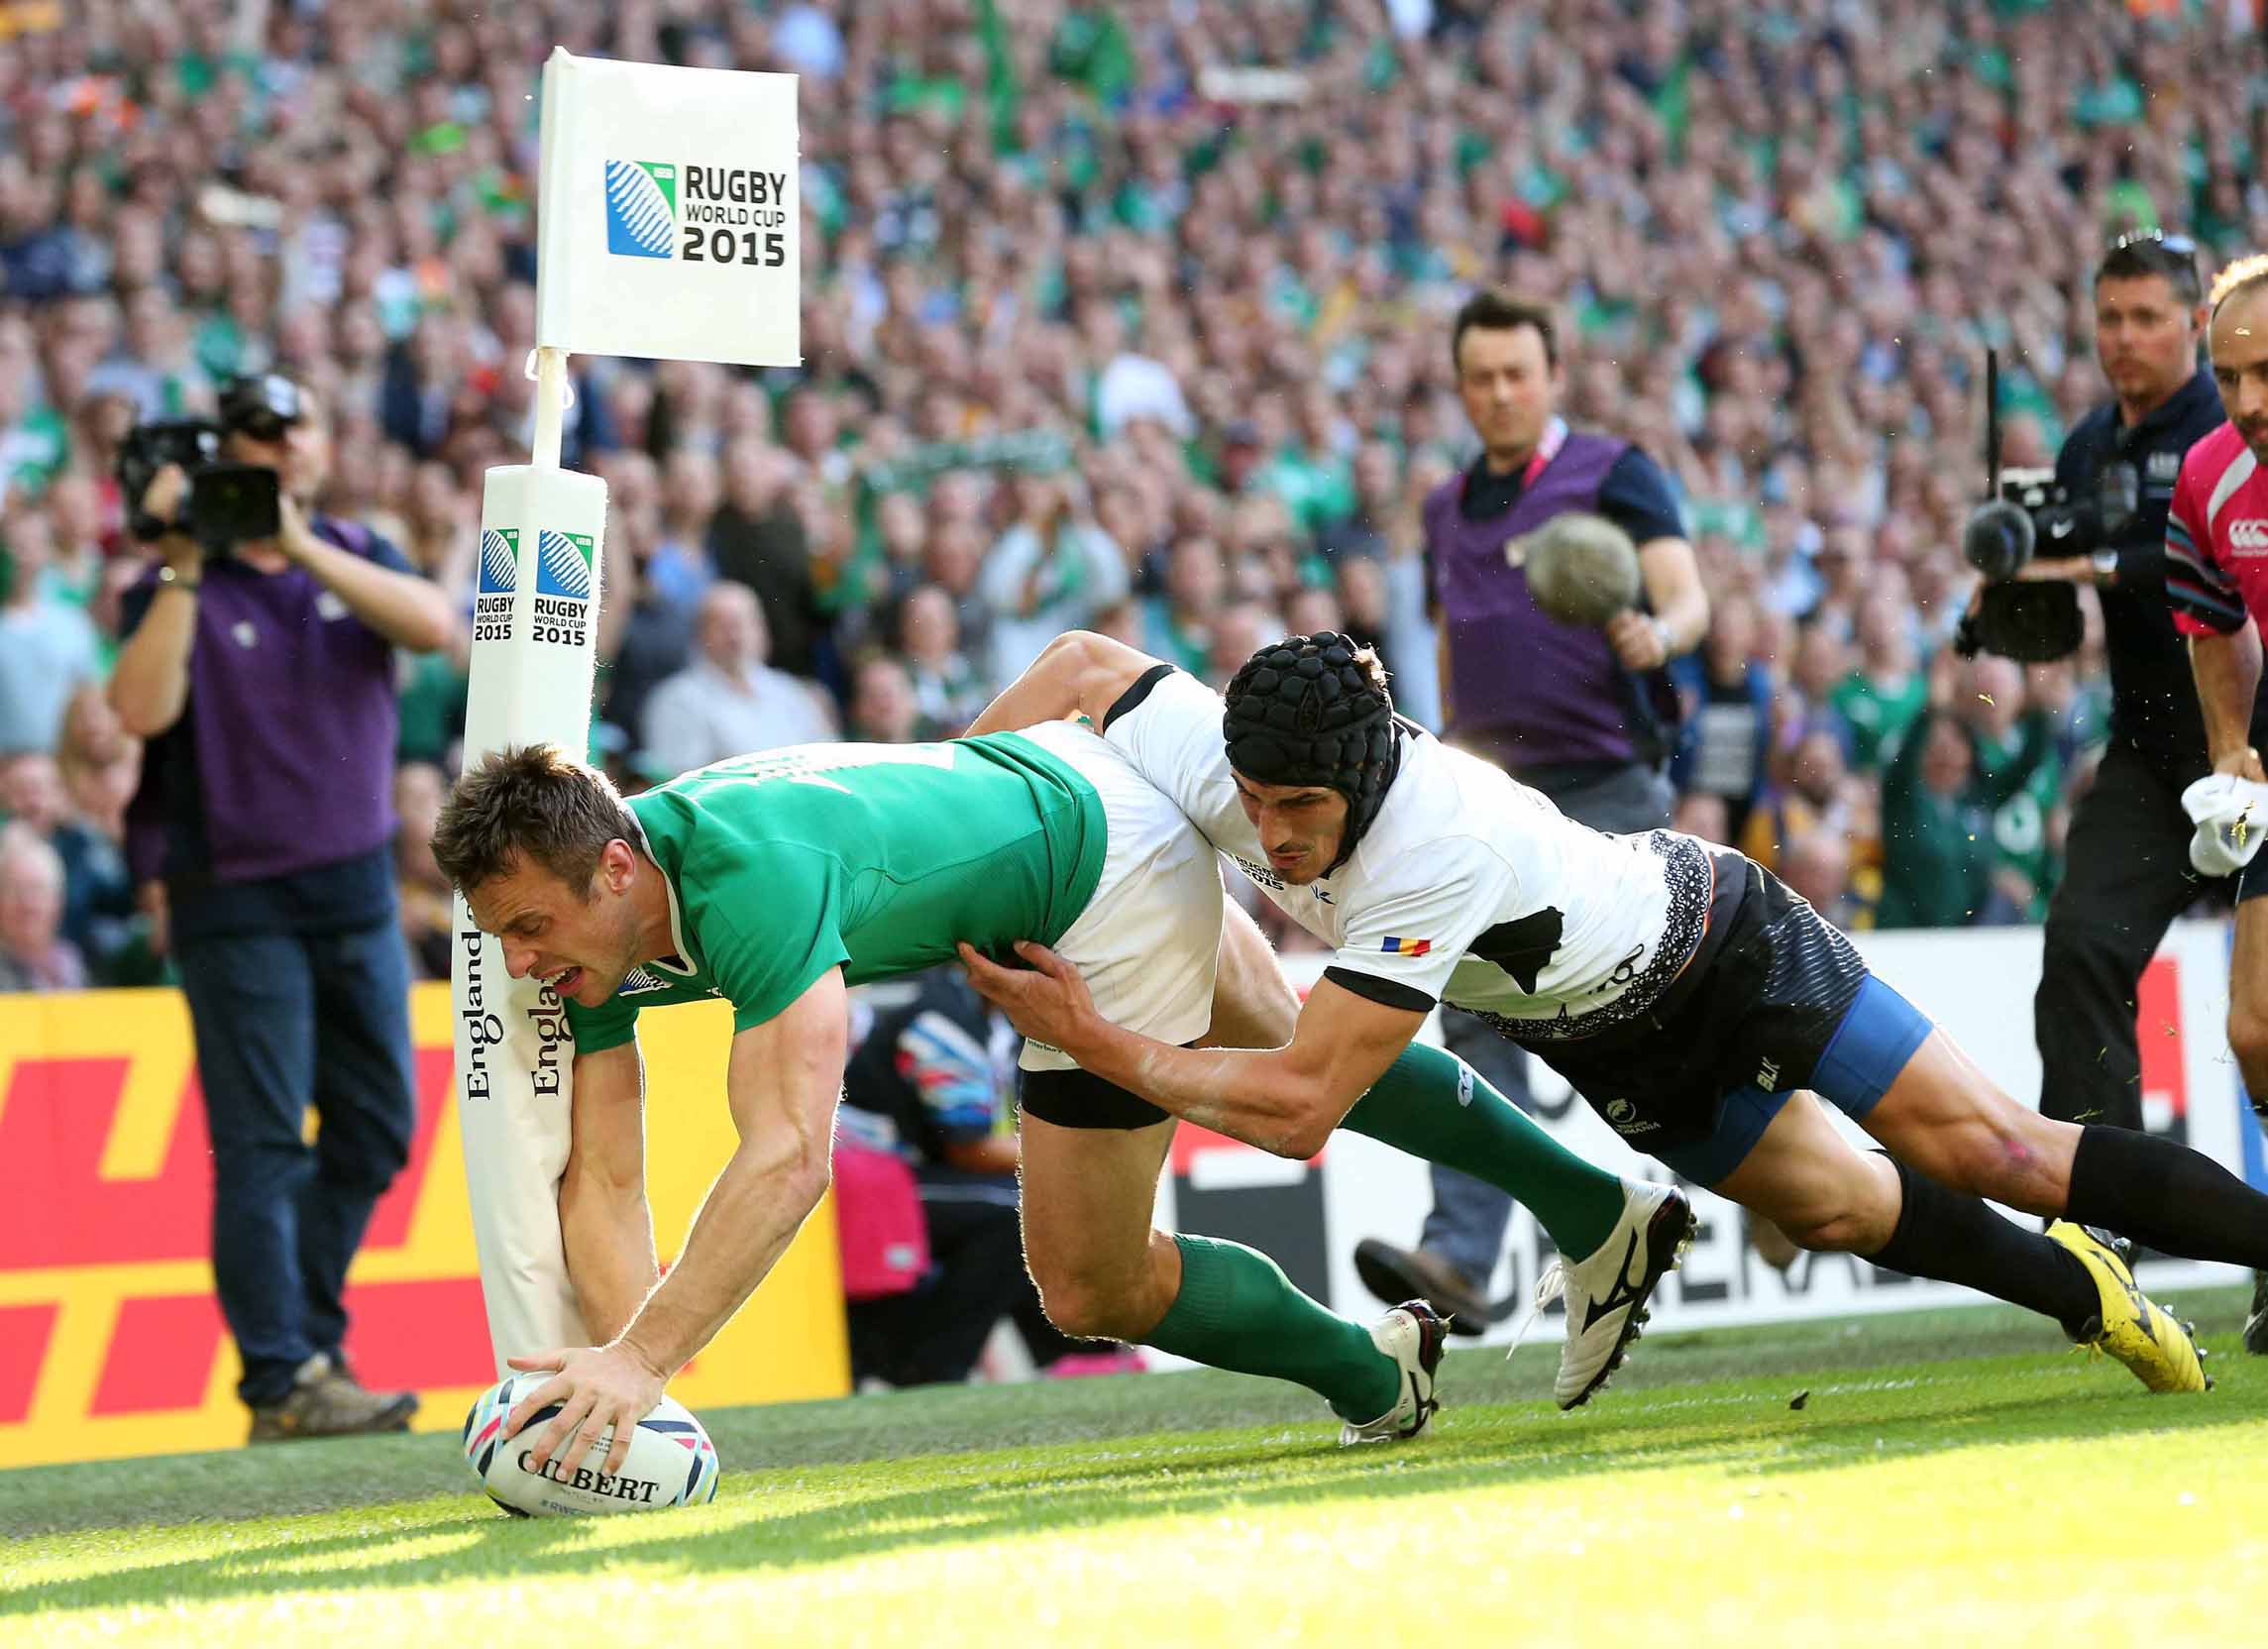 We’re expecting Tommy Bowe and company to rack up the points on Sunday, giving Italy a 19-point start